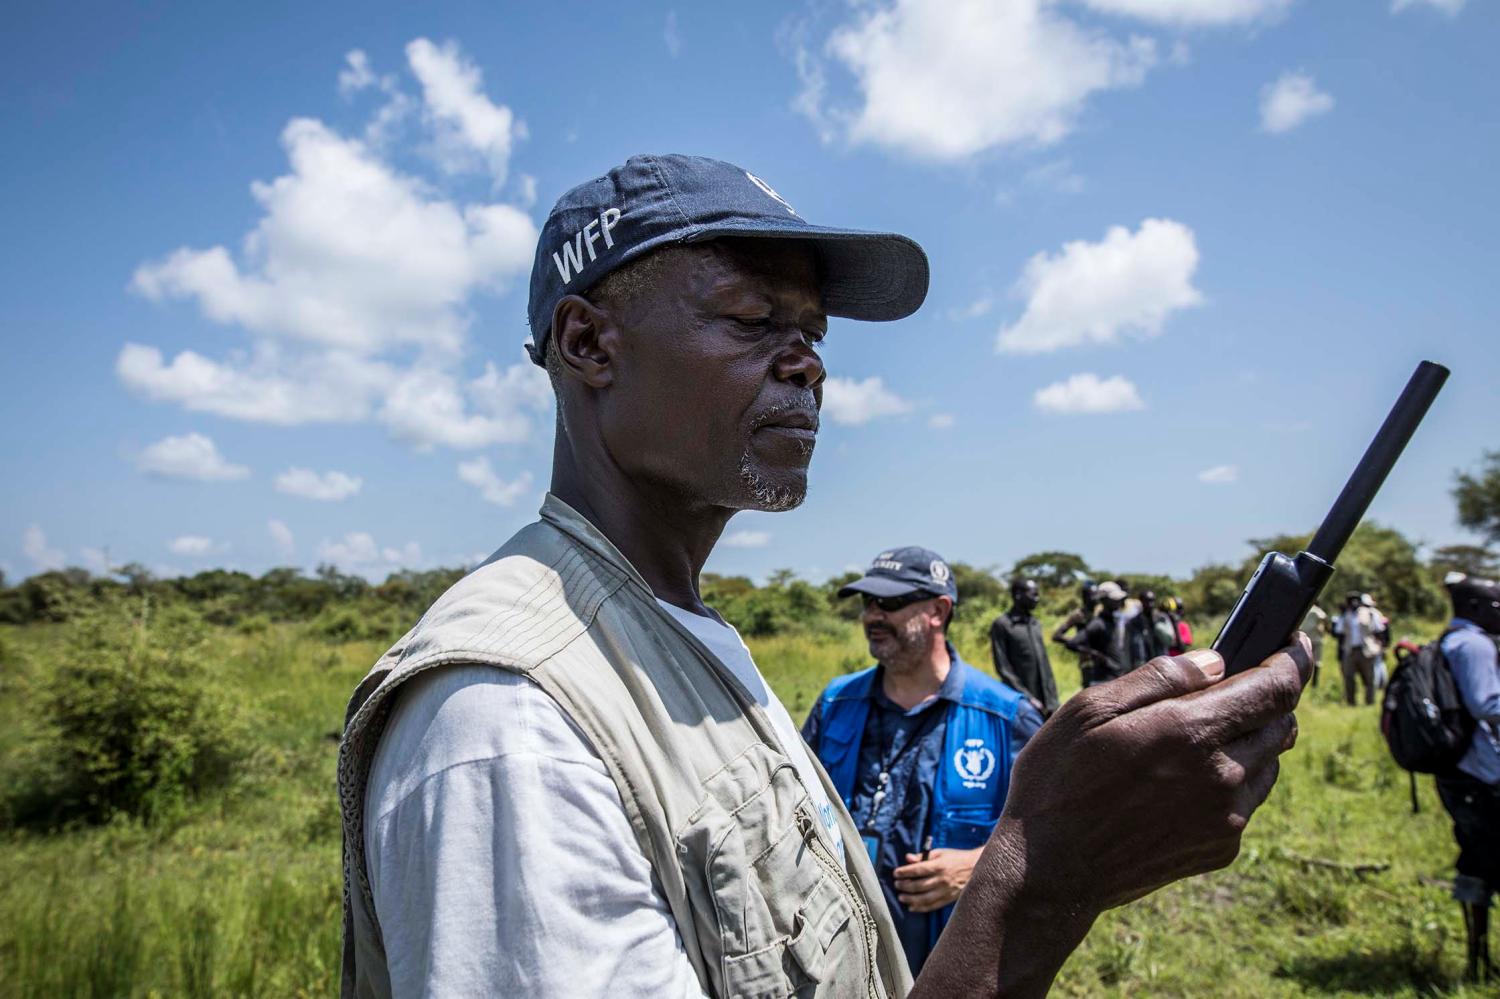 A World Food Programme employee uses a satellite phone to coordinate a U.N's World Food Programme (WFP) food aid air drop near the town of Katdalok, in Jonglei State of South Sudan July 30, 2018. REUTERS/Denis Dumo - RC172BCB7890